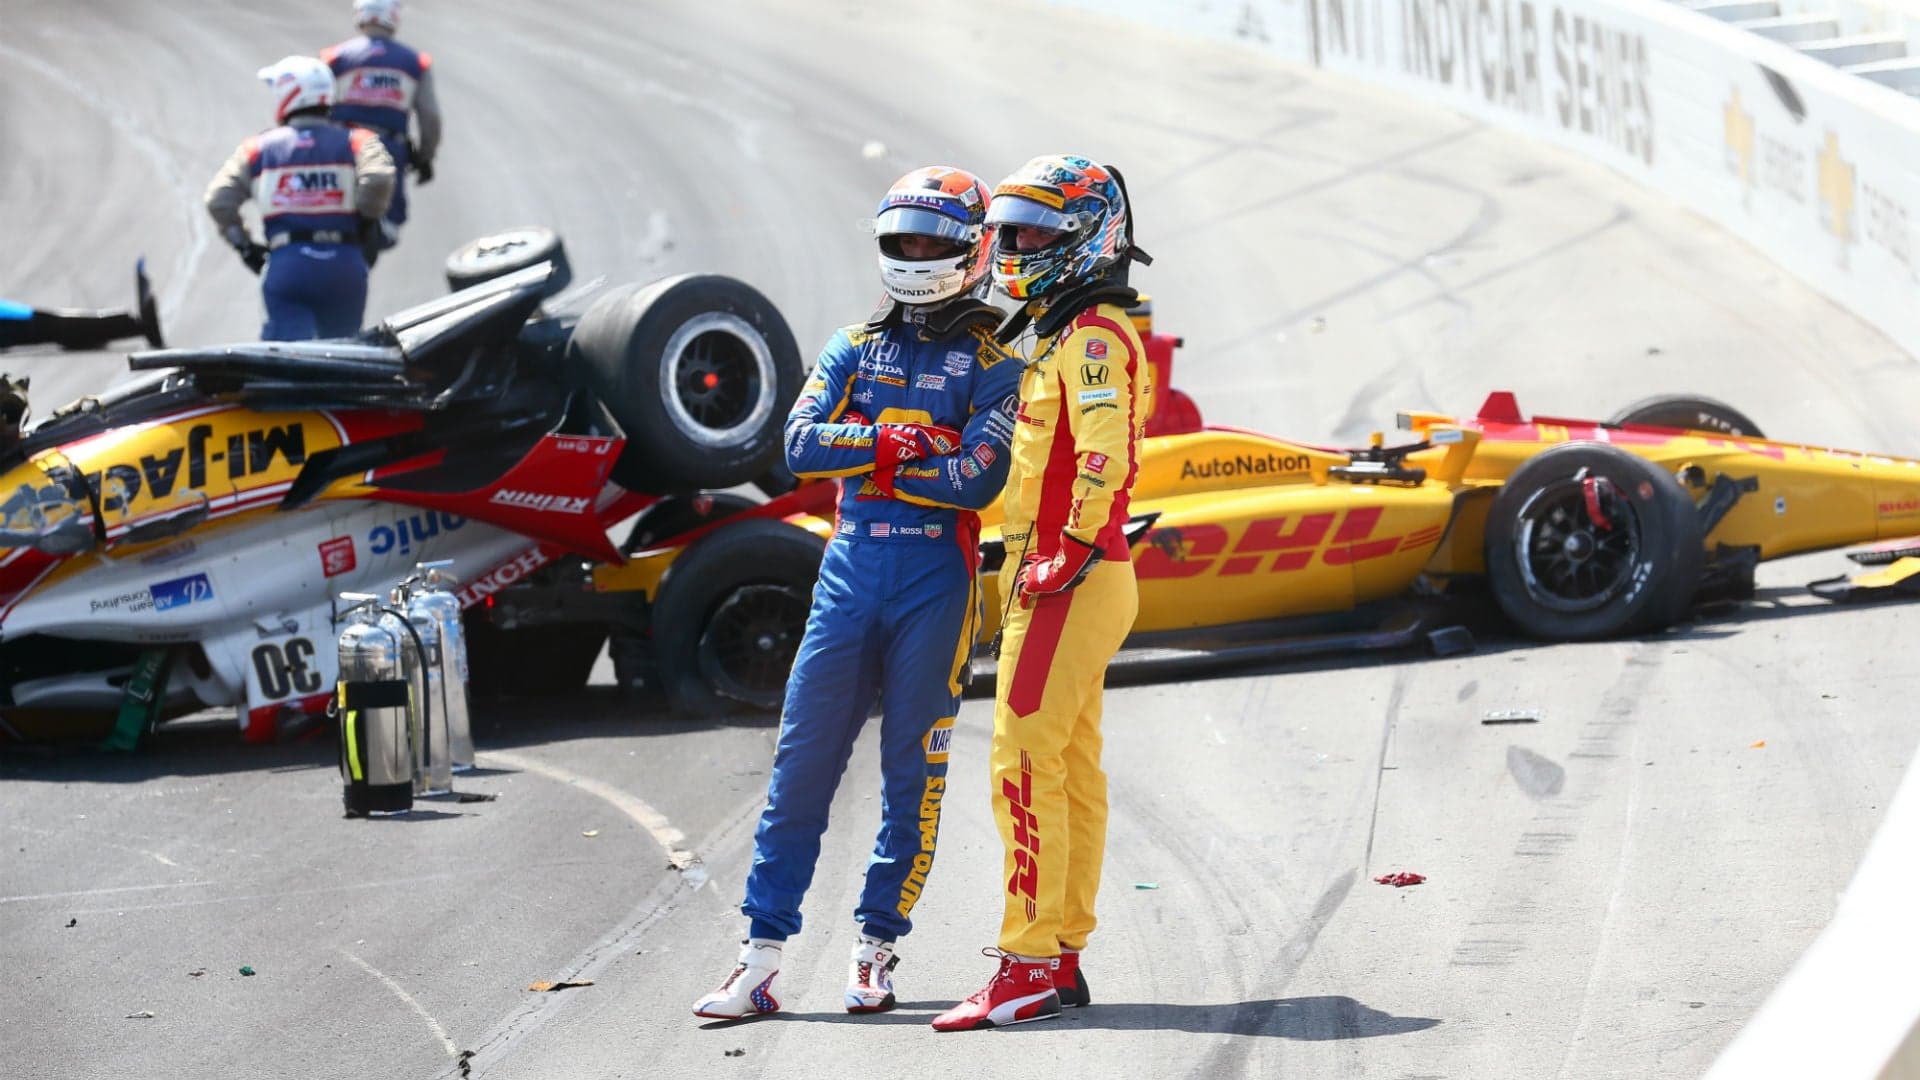 Yet Another Disastrous Pocono Race Prompts IndyCar Drivers to Voice Against Treacherous Track